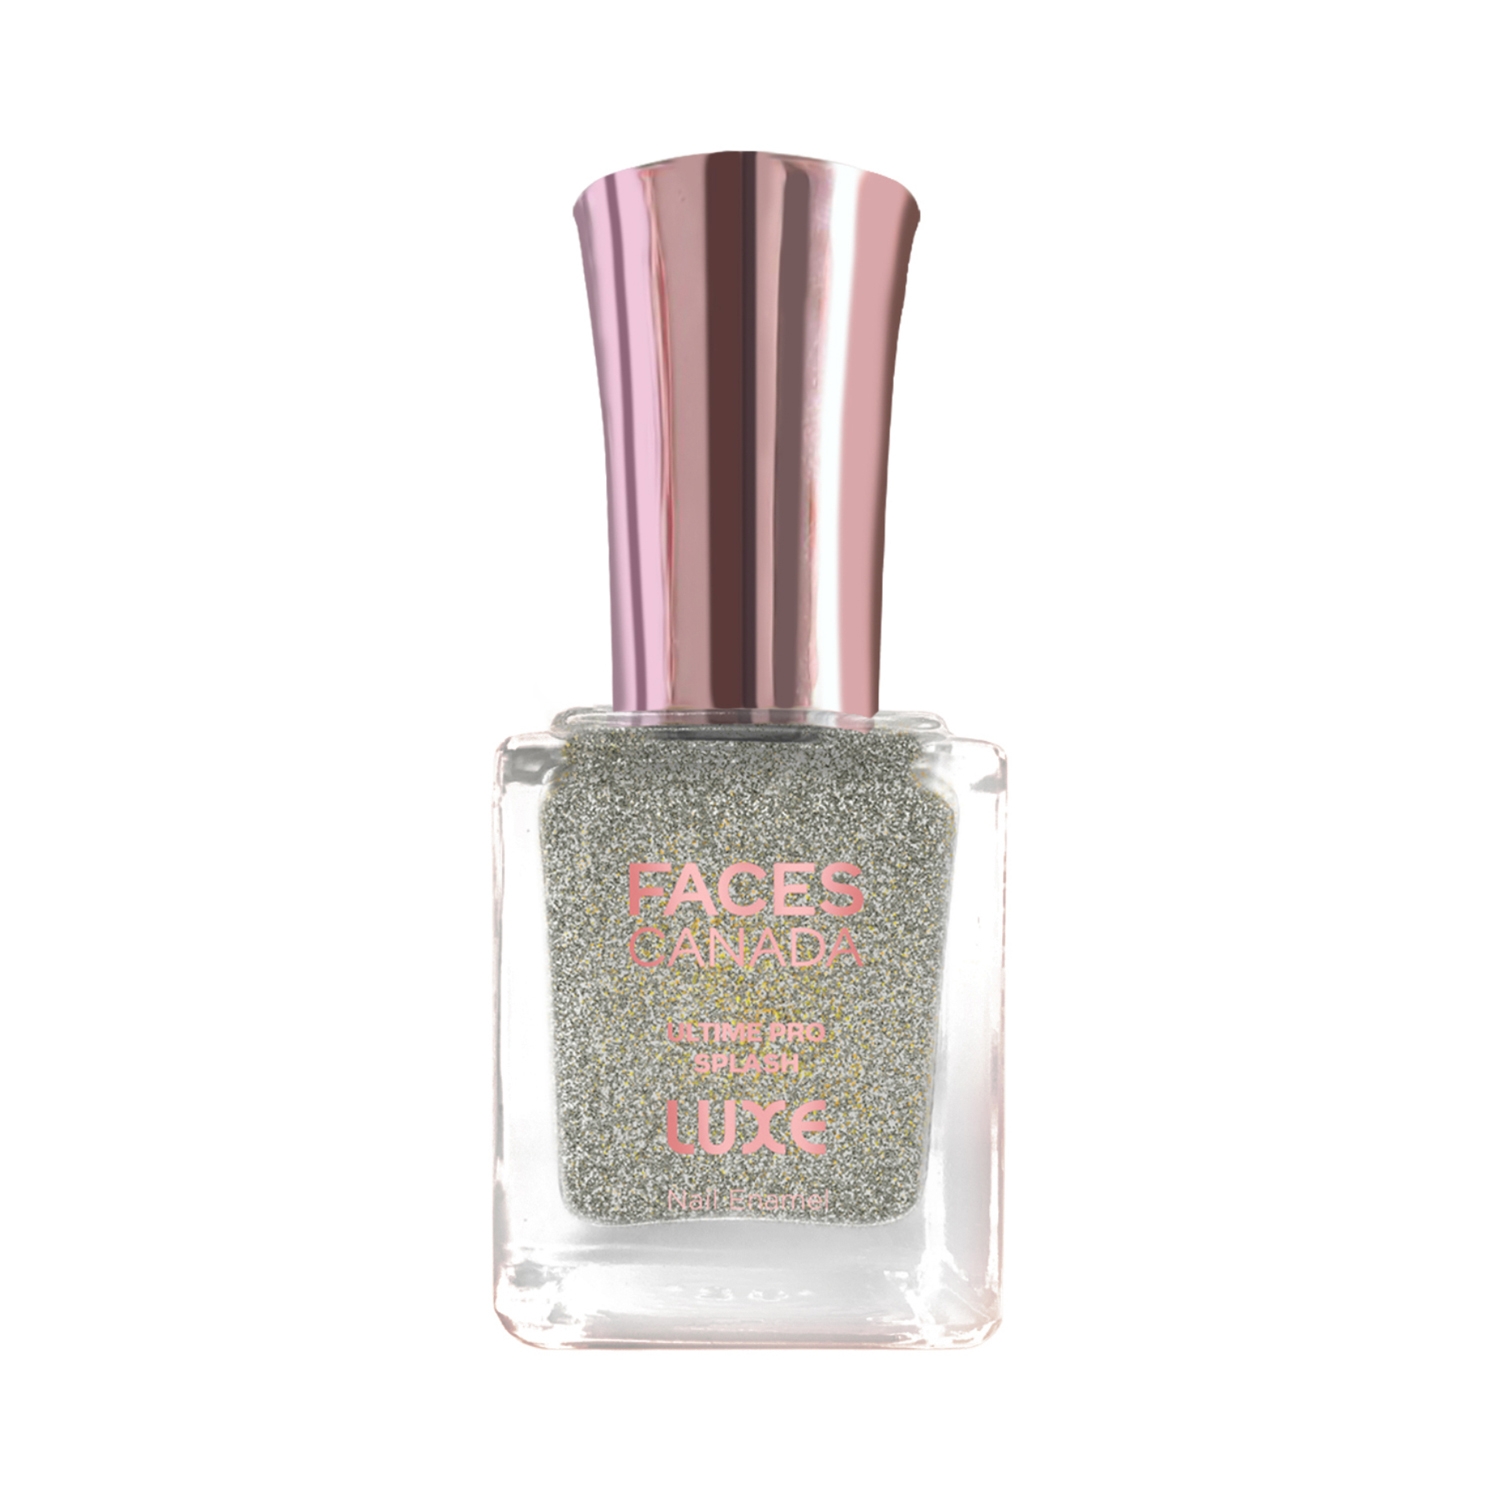 Faces Canada | Faces Canada Ultime Pro Splash Luxe Nail Enamel - L14 Blink Wink (12ml)